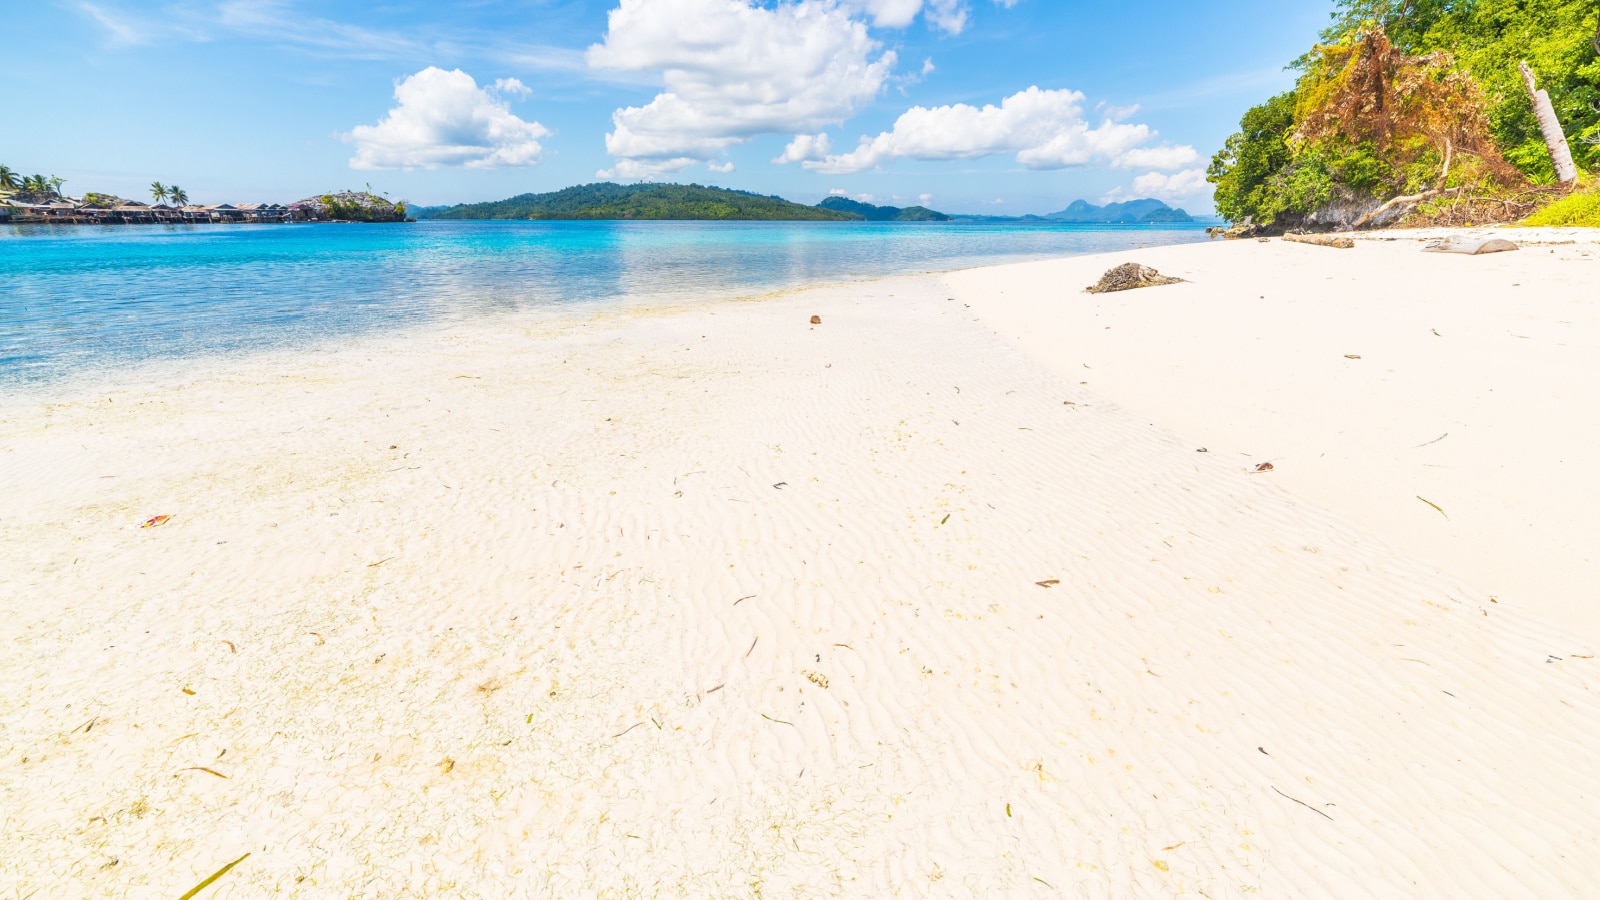 White sandy beach, turquoise transparent water and lush green jungle in the remote Togean (or Togian) Islands, Sulawesi, Indonesia. Islets and fishermen village in the background. wide angle view.